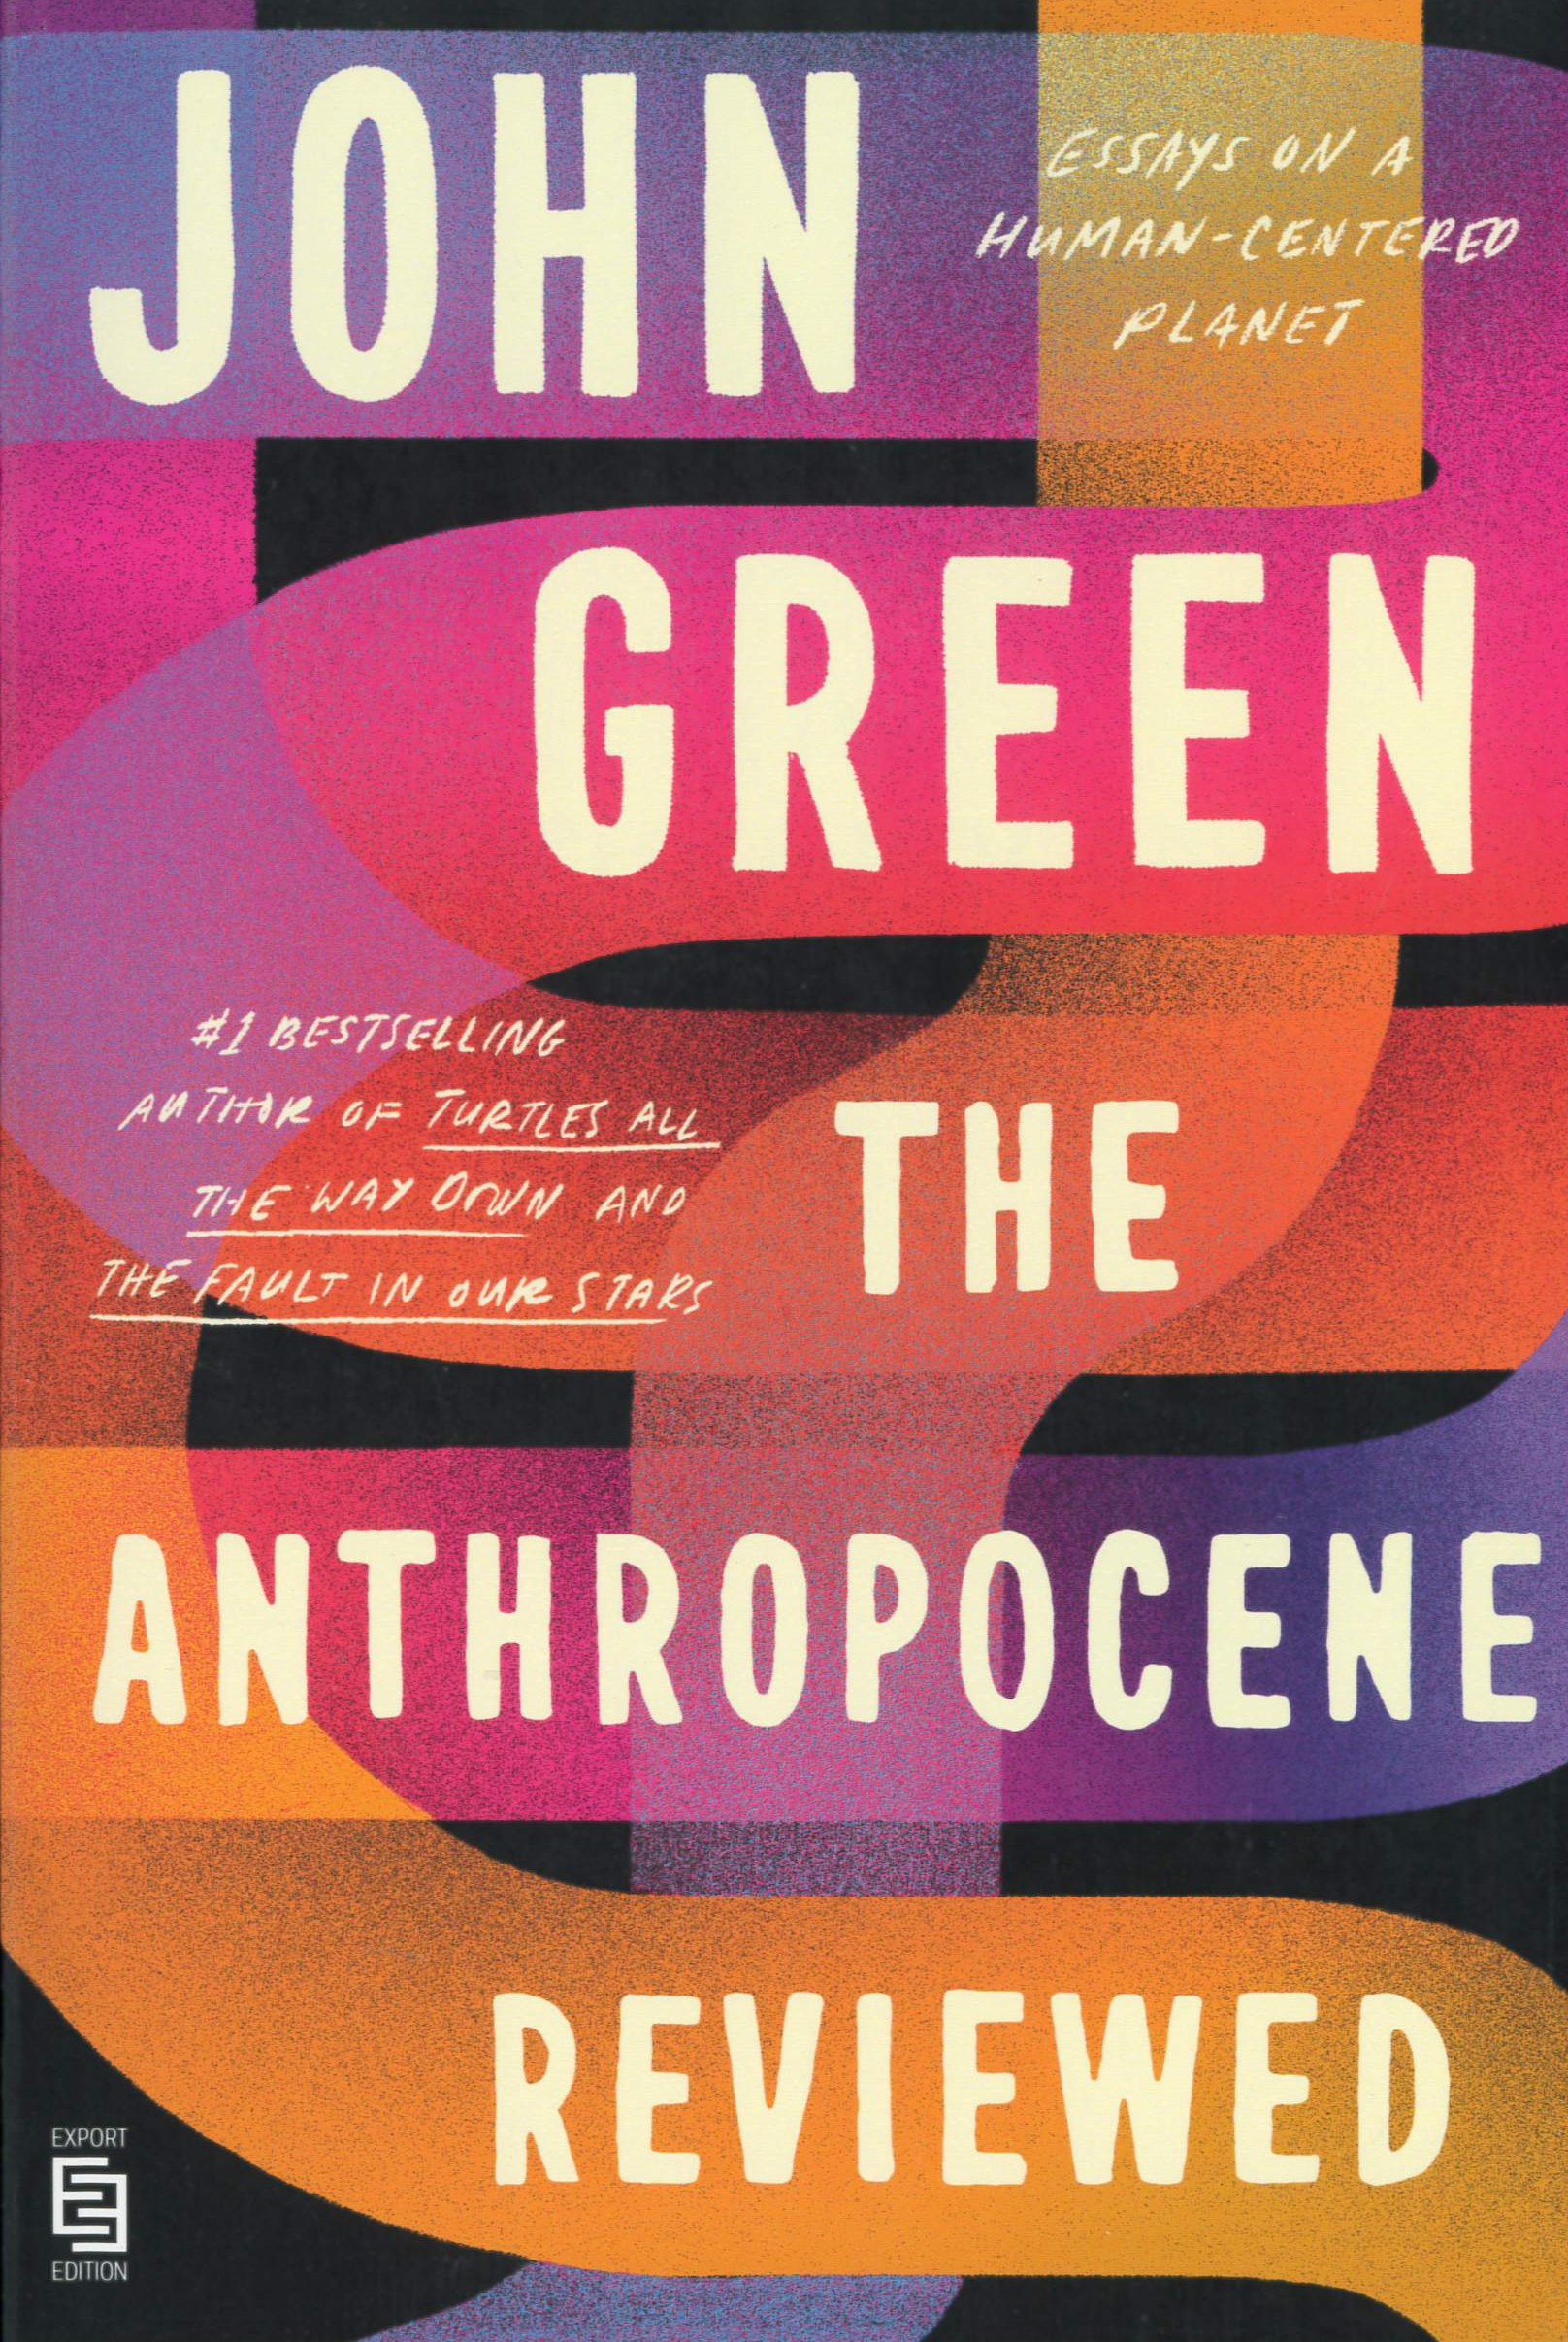 The Anthropocene reviewed : essays on a human-centered planet /